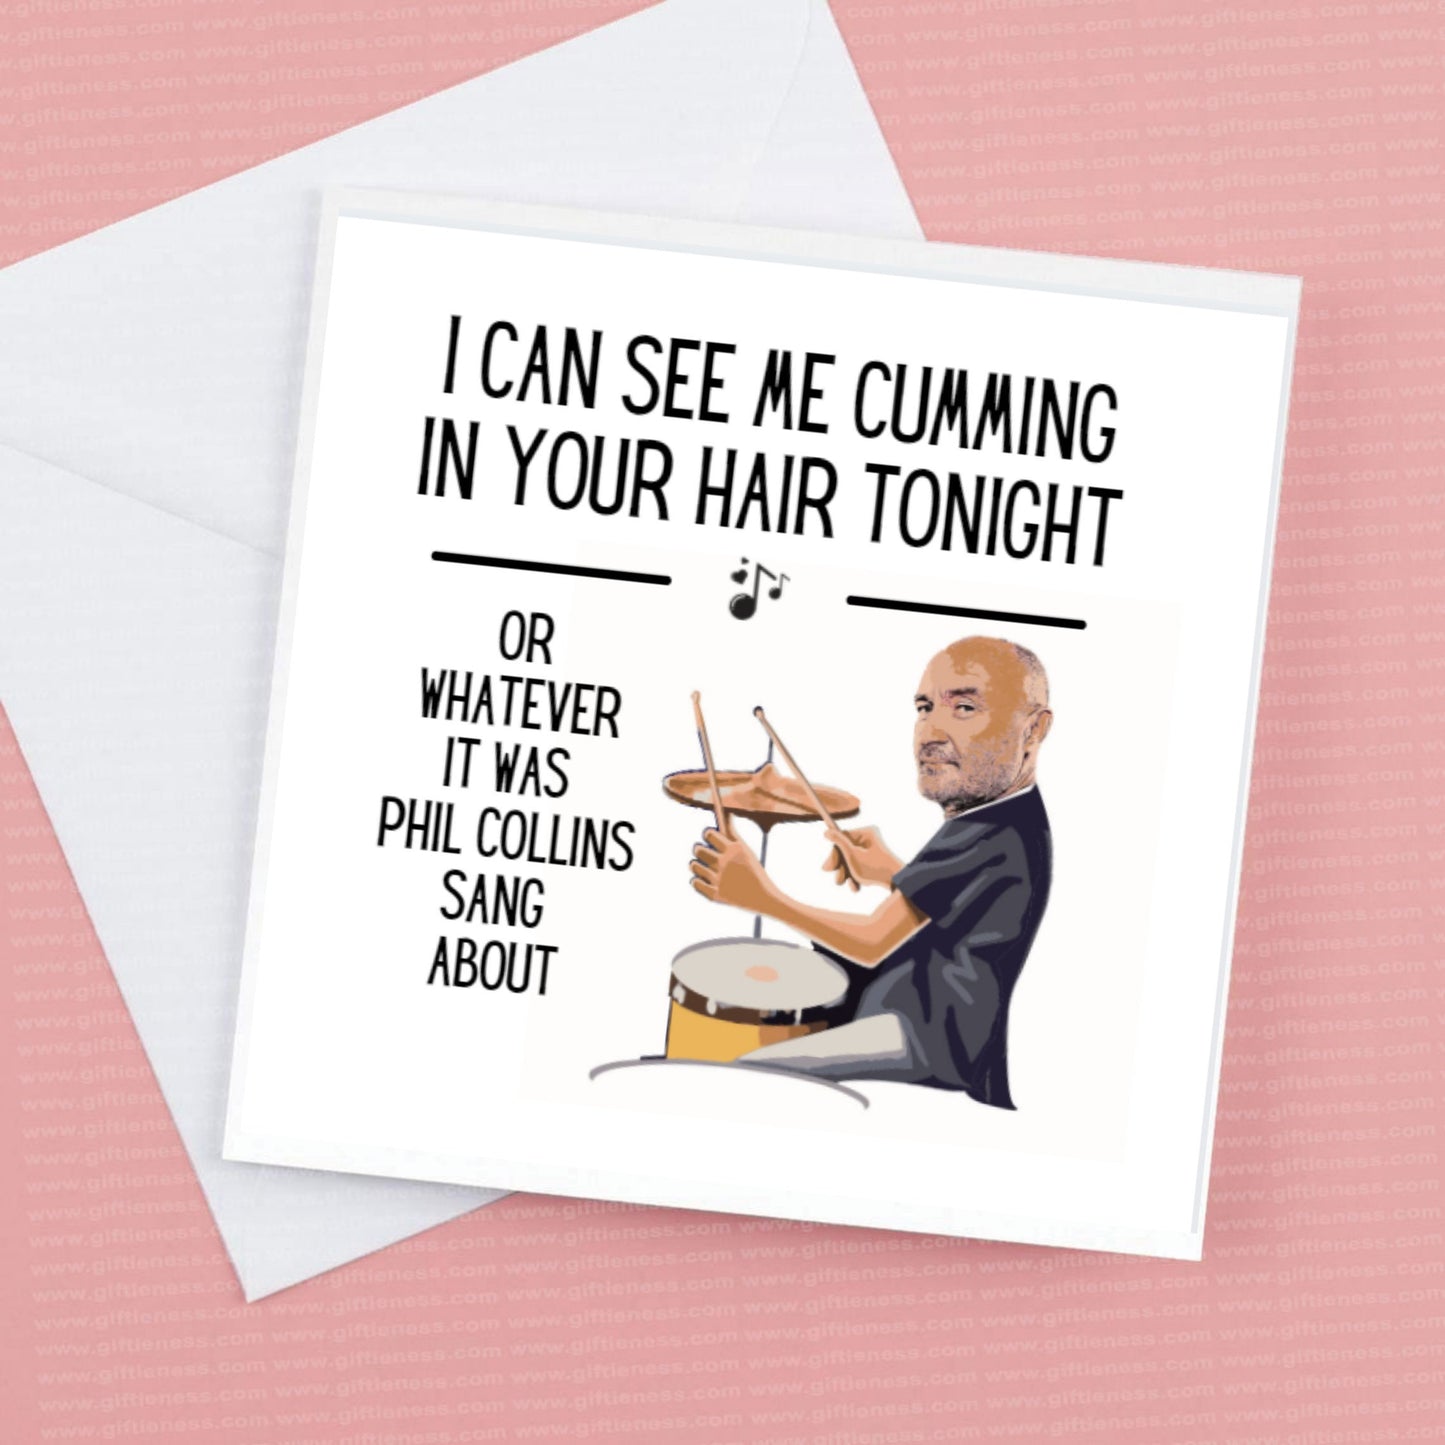 Valentines card “I can see me cumming in your hair tonight”